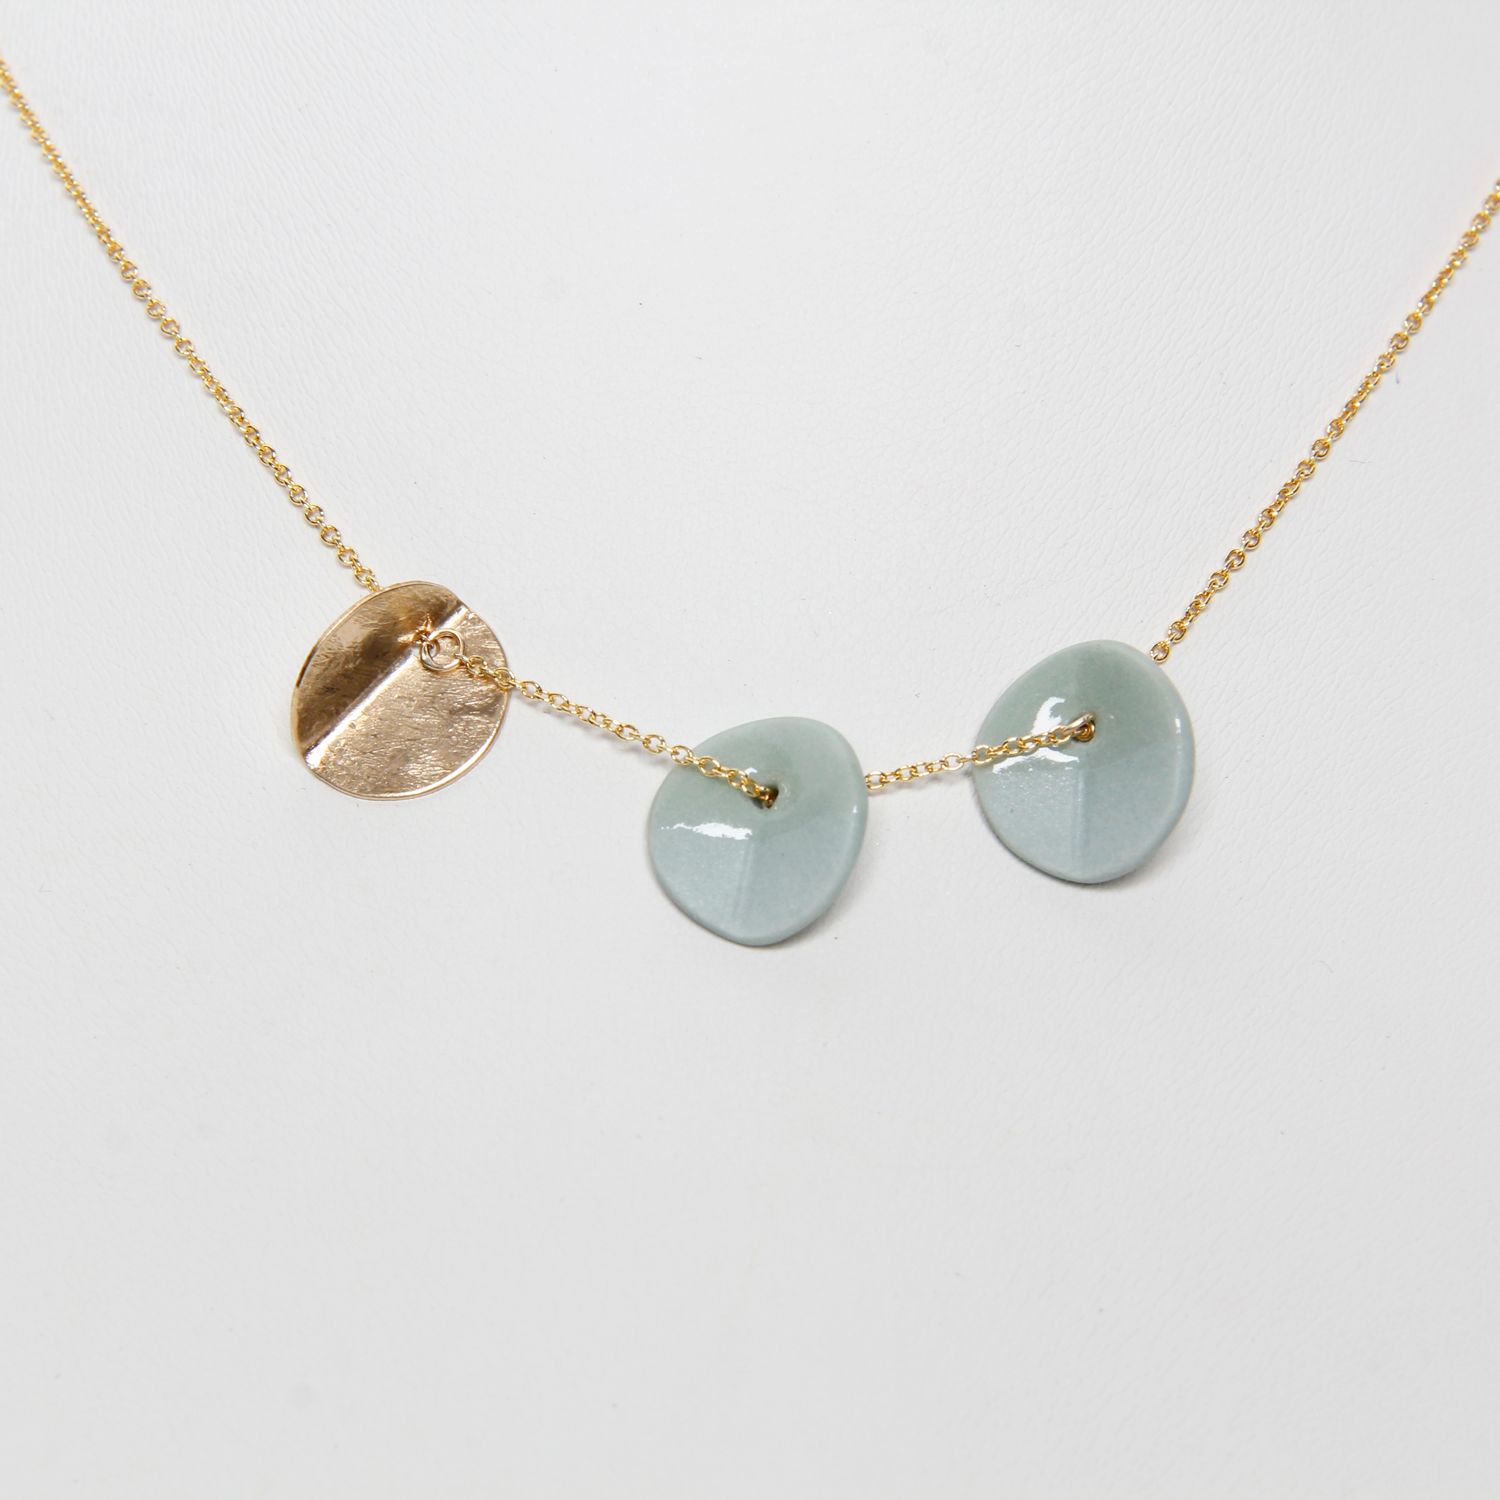 Chayle Jewellry: Eucalyptus Triple Teal and Gold Pendant Product Image 2 of 2